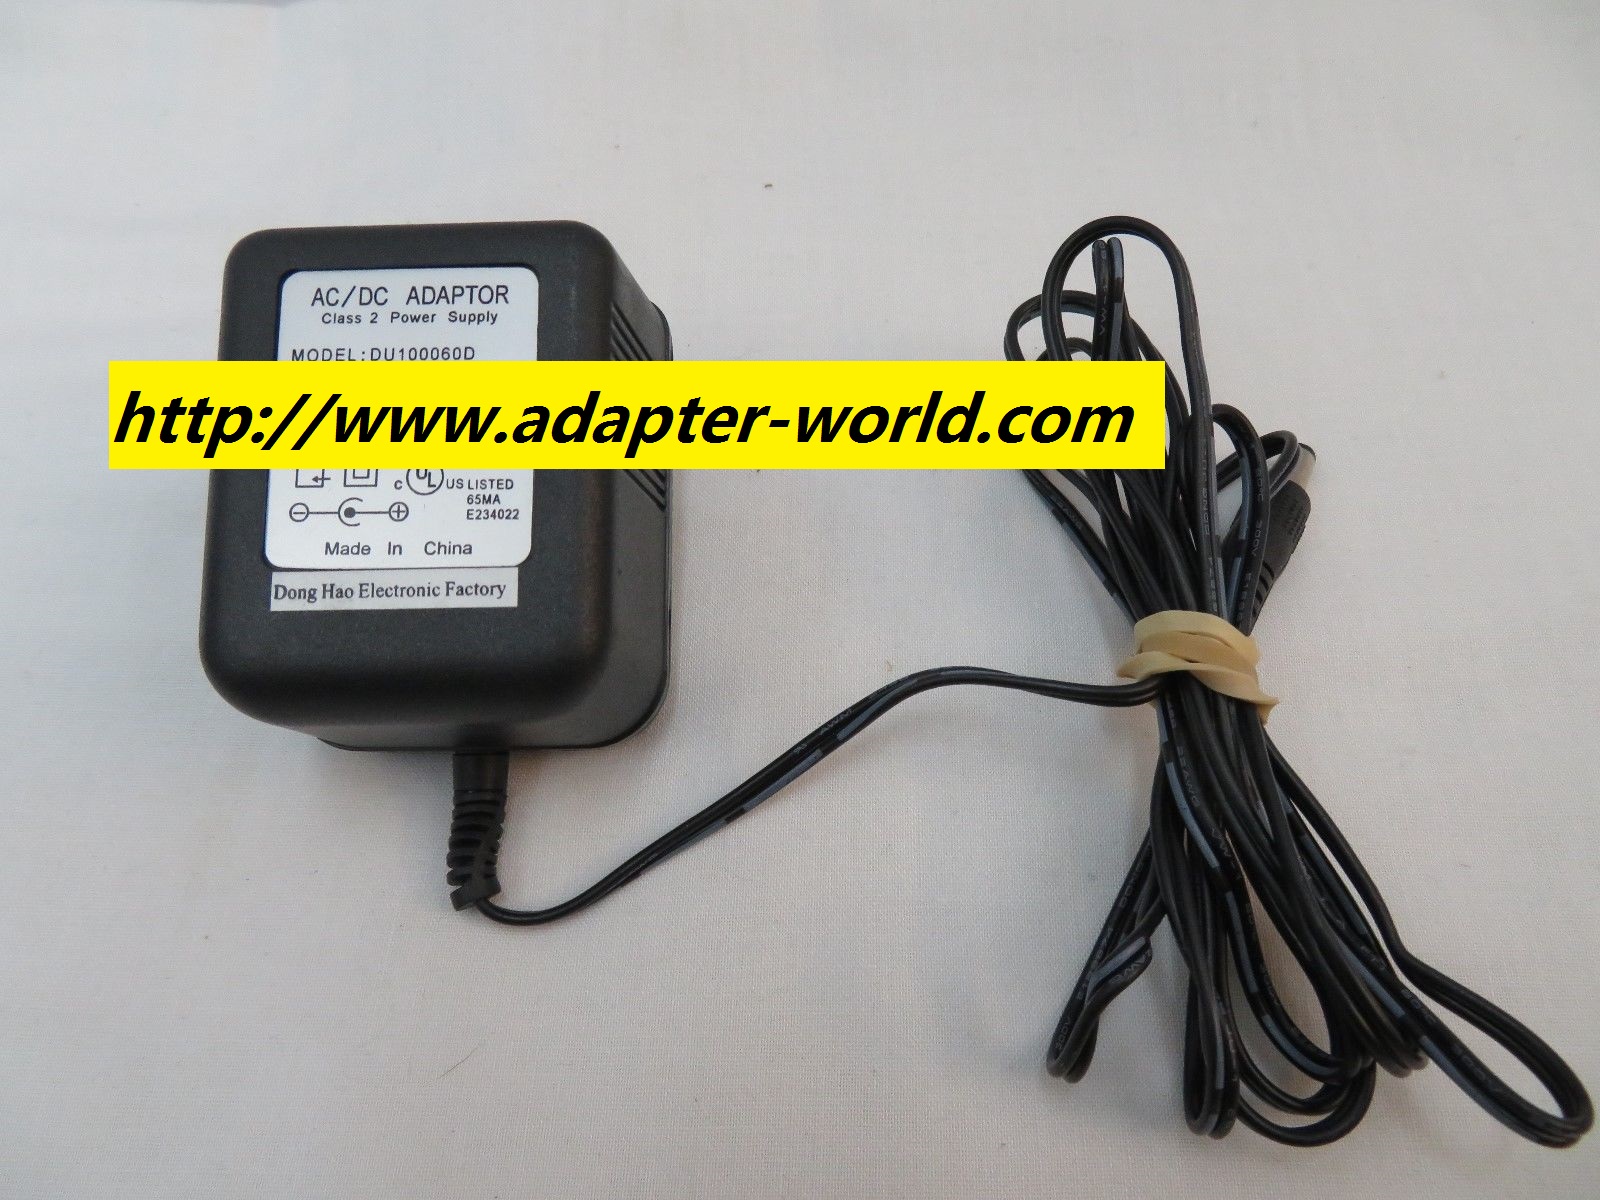 *100% Brand NEW* Cable Source Output 12V 1.5A IVP045-120-1500 AC DC Power Supply Adapter Charger